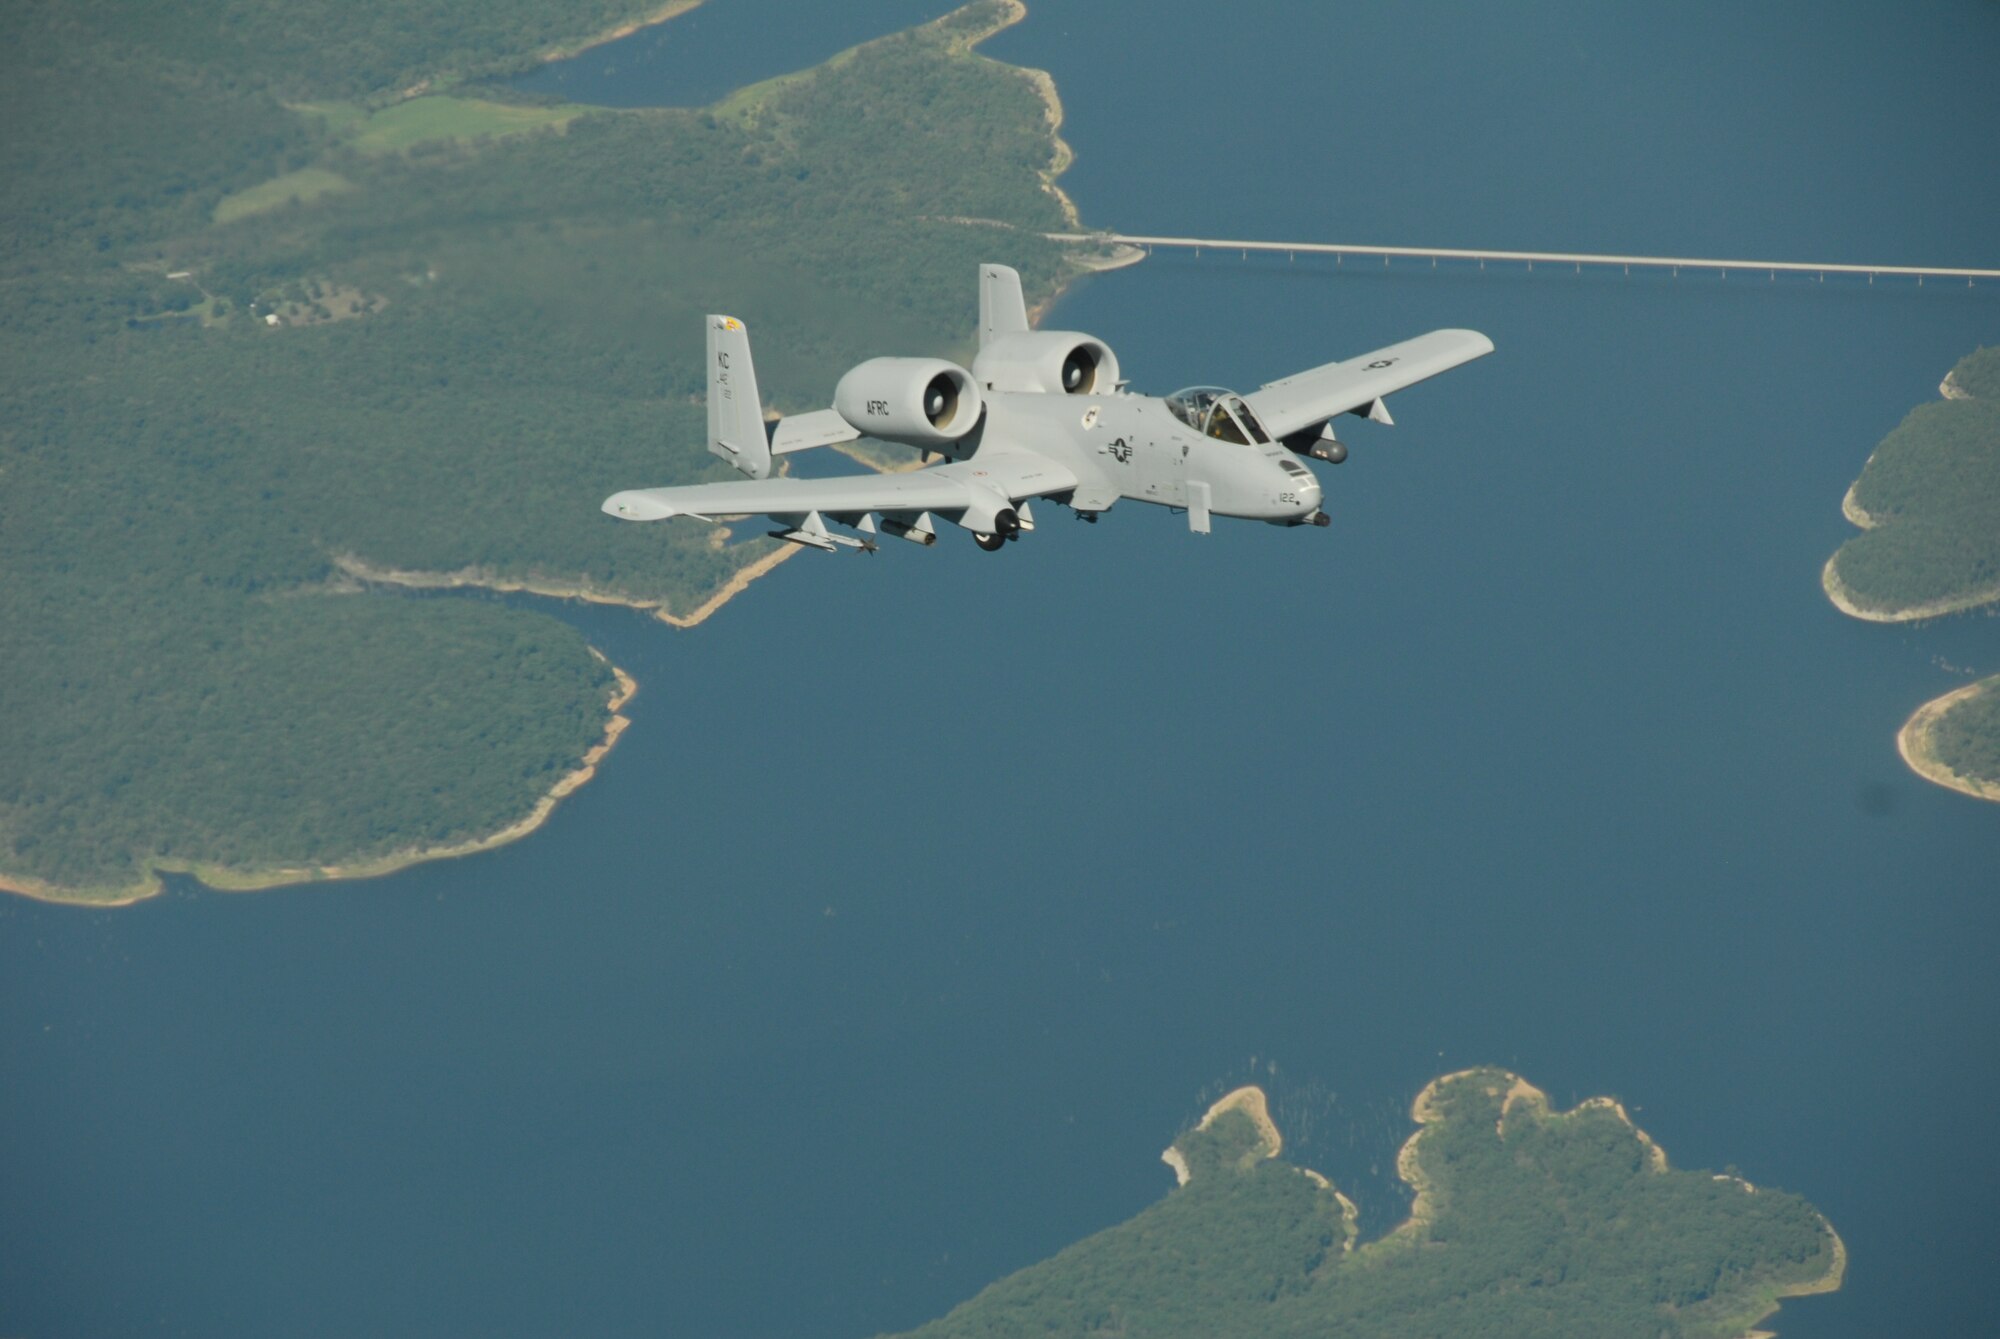 An A-10 Thunderbolt II flies over Lake of the Ozarks during a refueling mission in September. The A-10s belong to the 442nd Fighter Wing, an Air Force Reserve unit at Whiteman Air Force Base, Mo. (U.S. Air Force photo/Staff Sgt. Danielle Wolf)